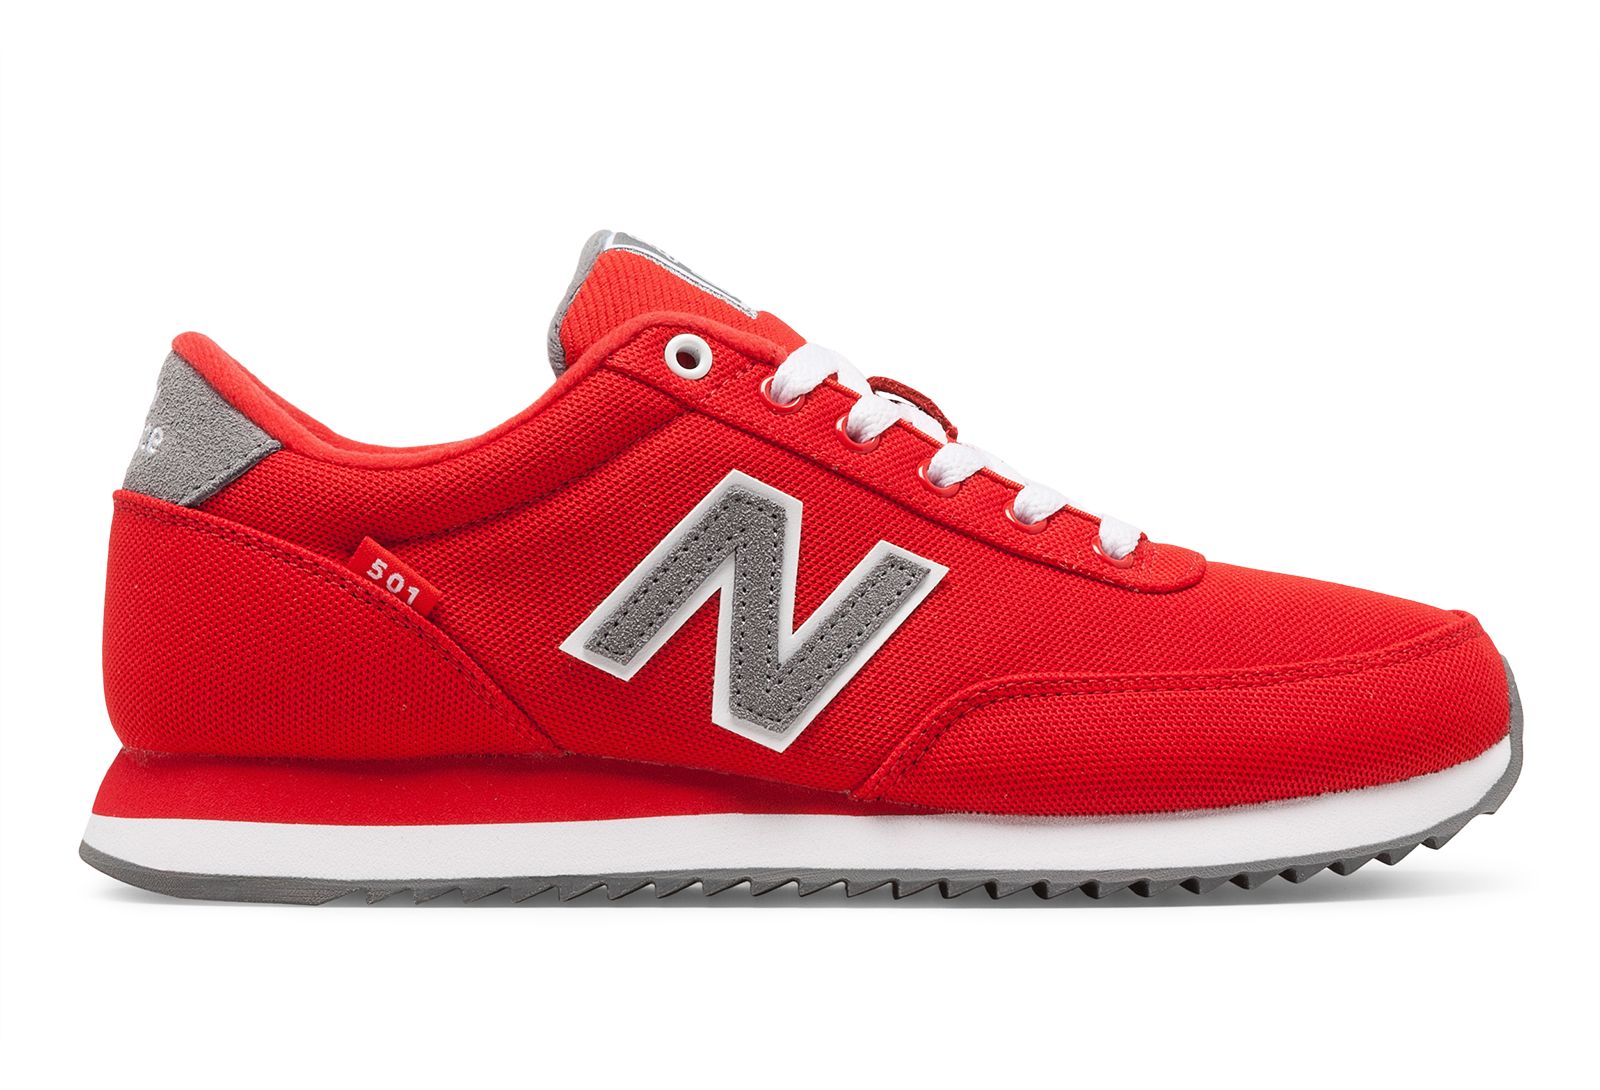 Off on WZ501POR at Joe's New Balance Outlet